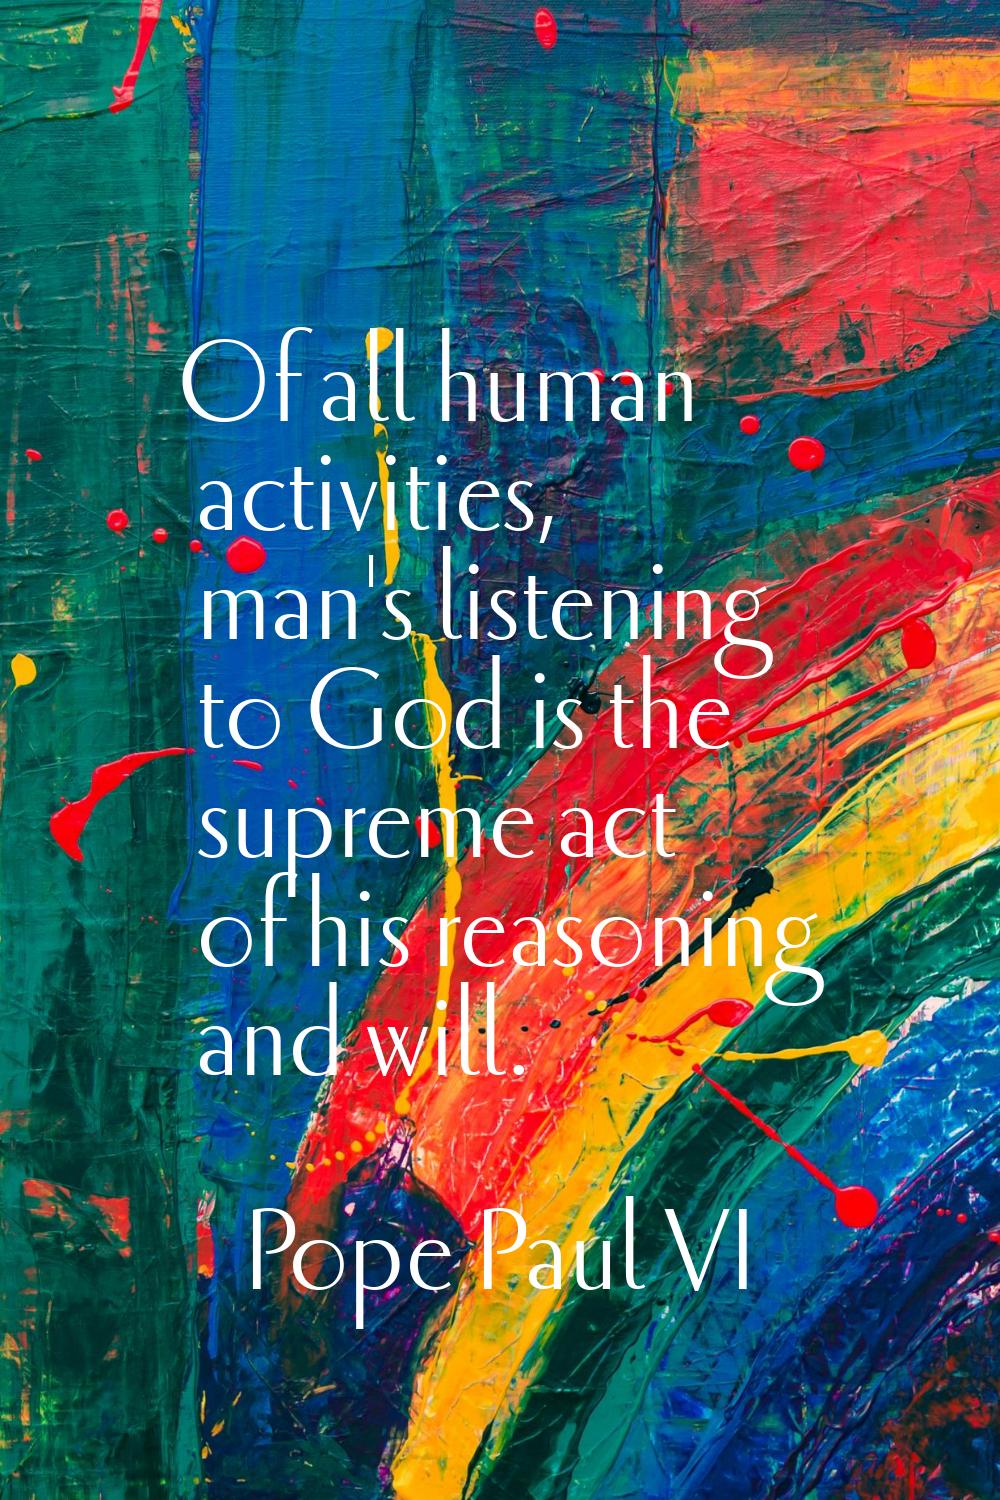 Of all human activities, man's listening to God is the supreme act of his reasoning and will.